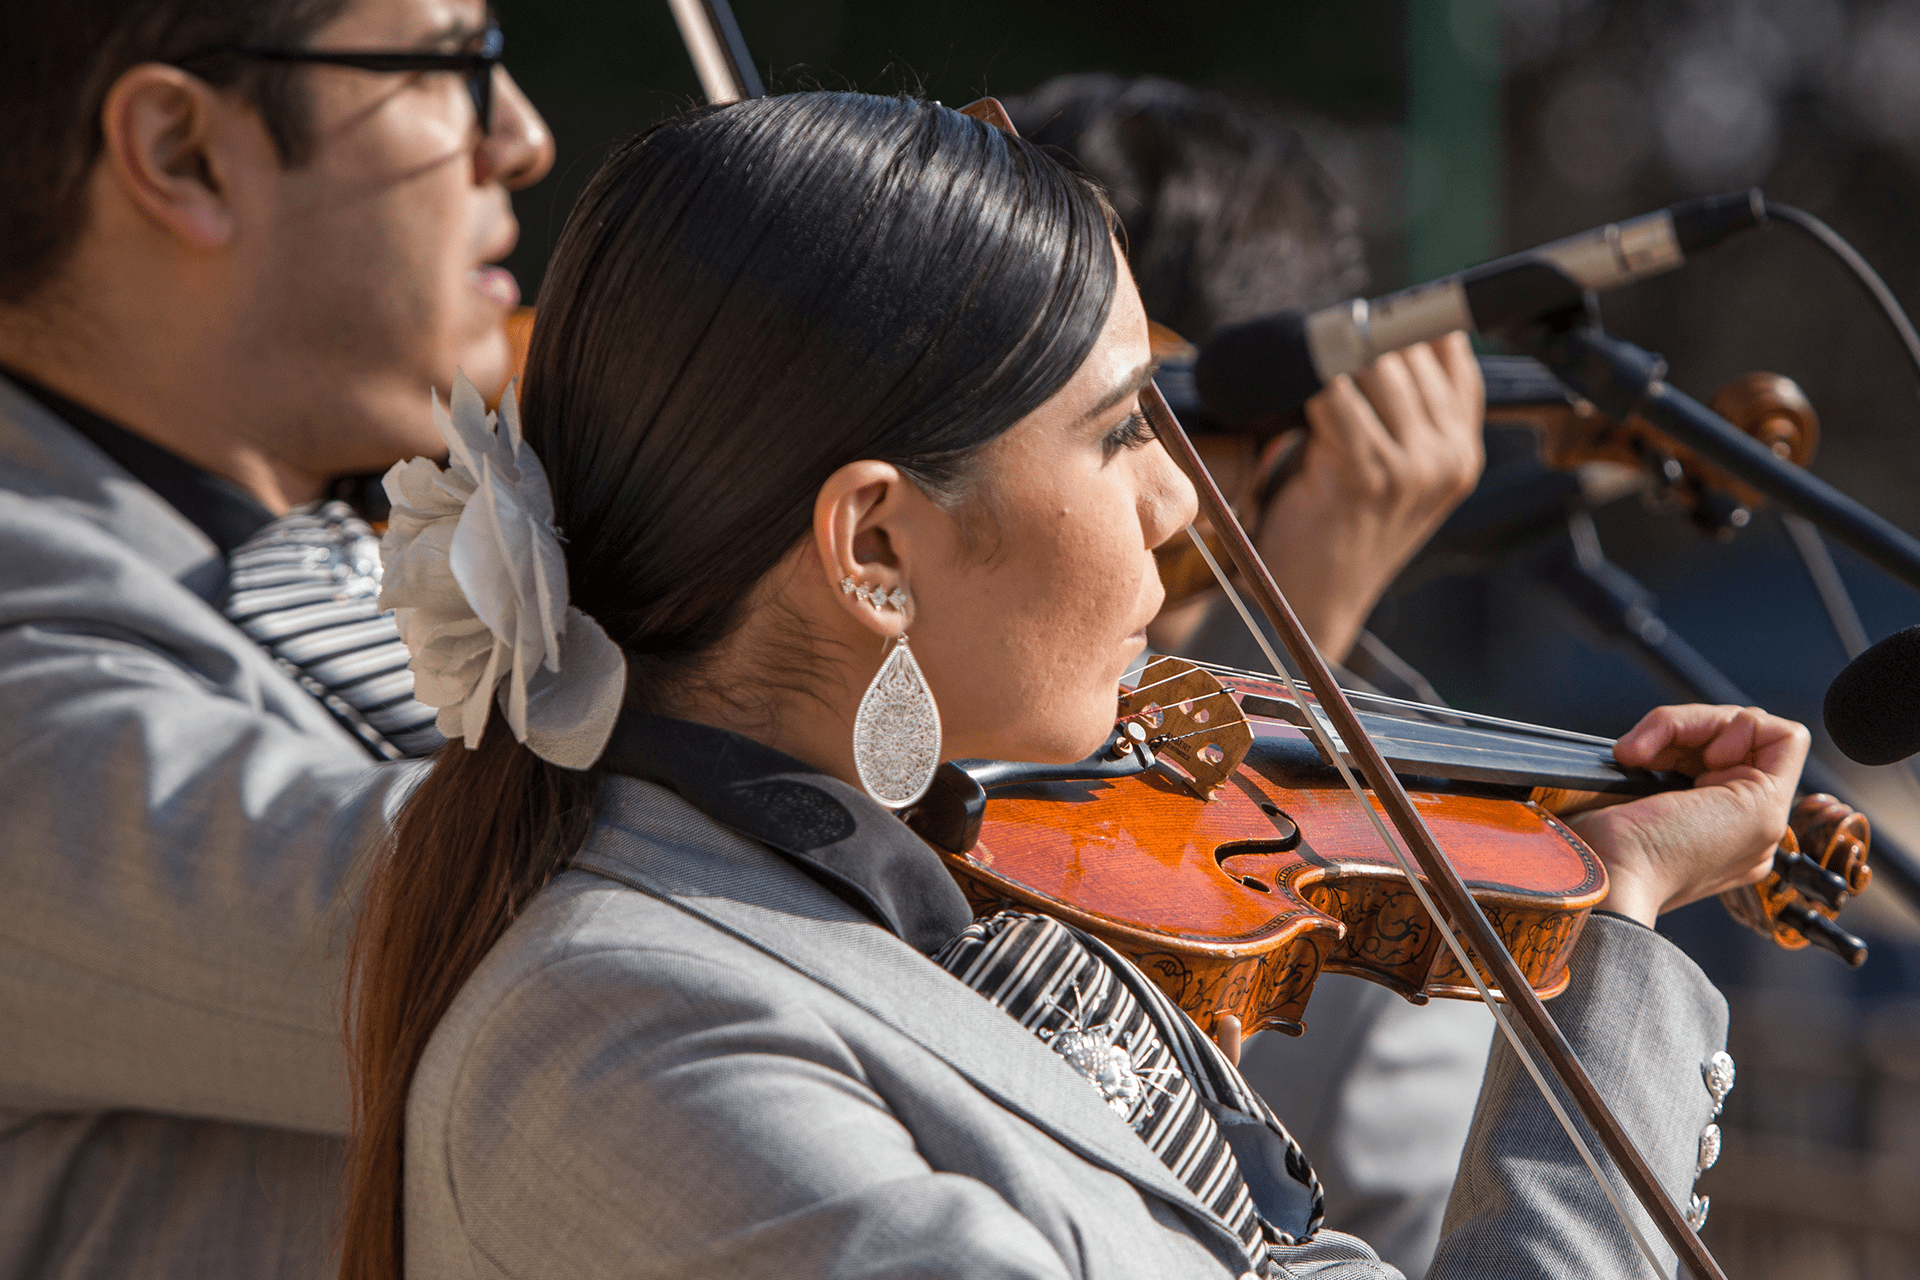  Profile image of Mariachi Voces Tapatias performing, with a female violinist in the foreground.